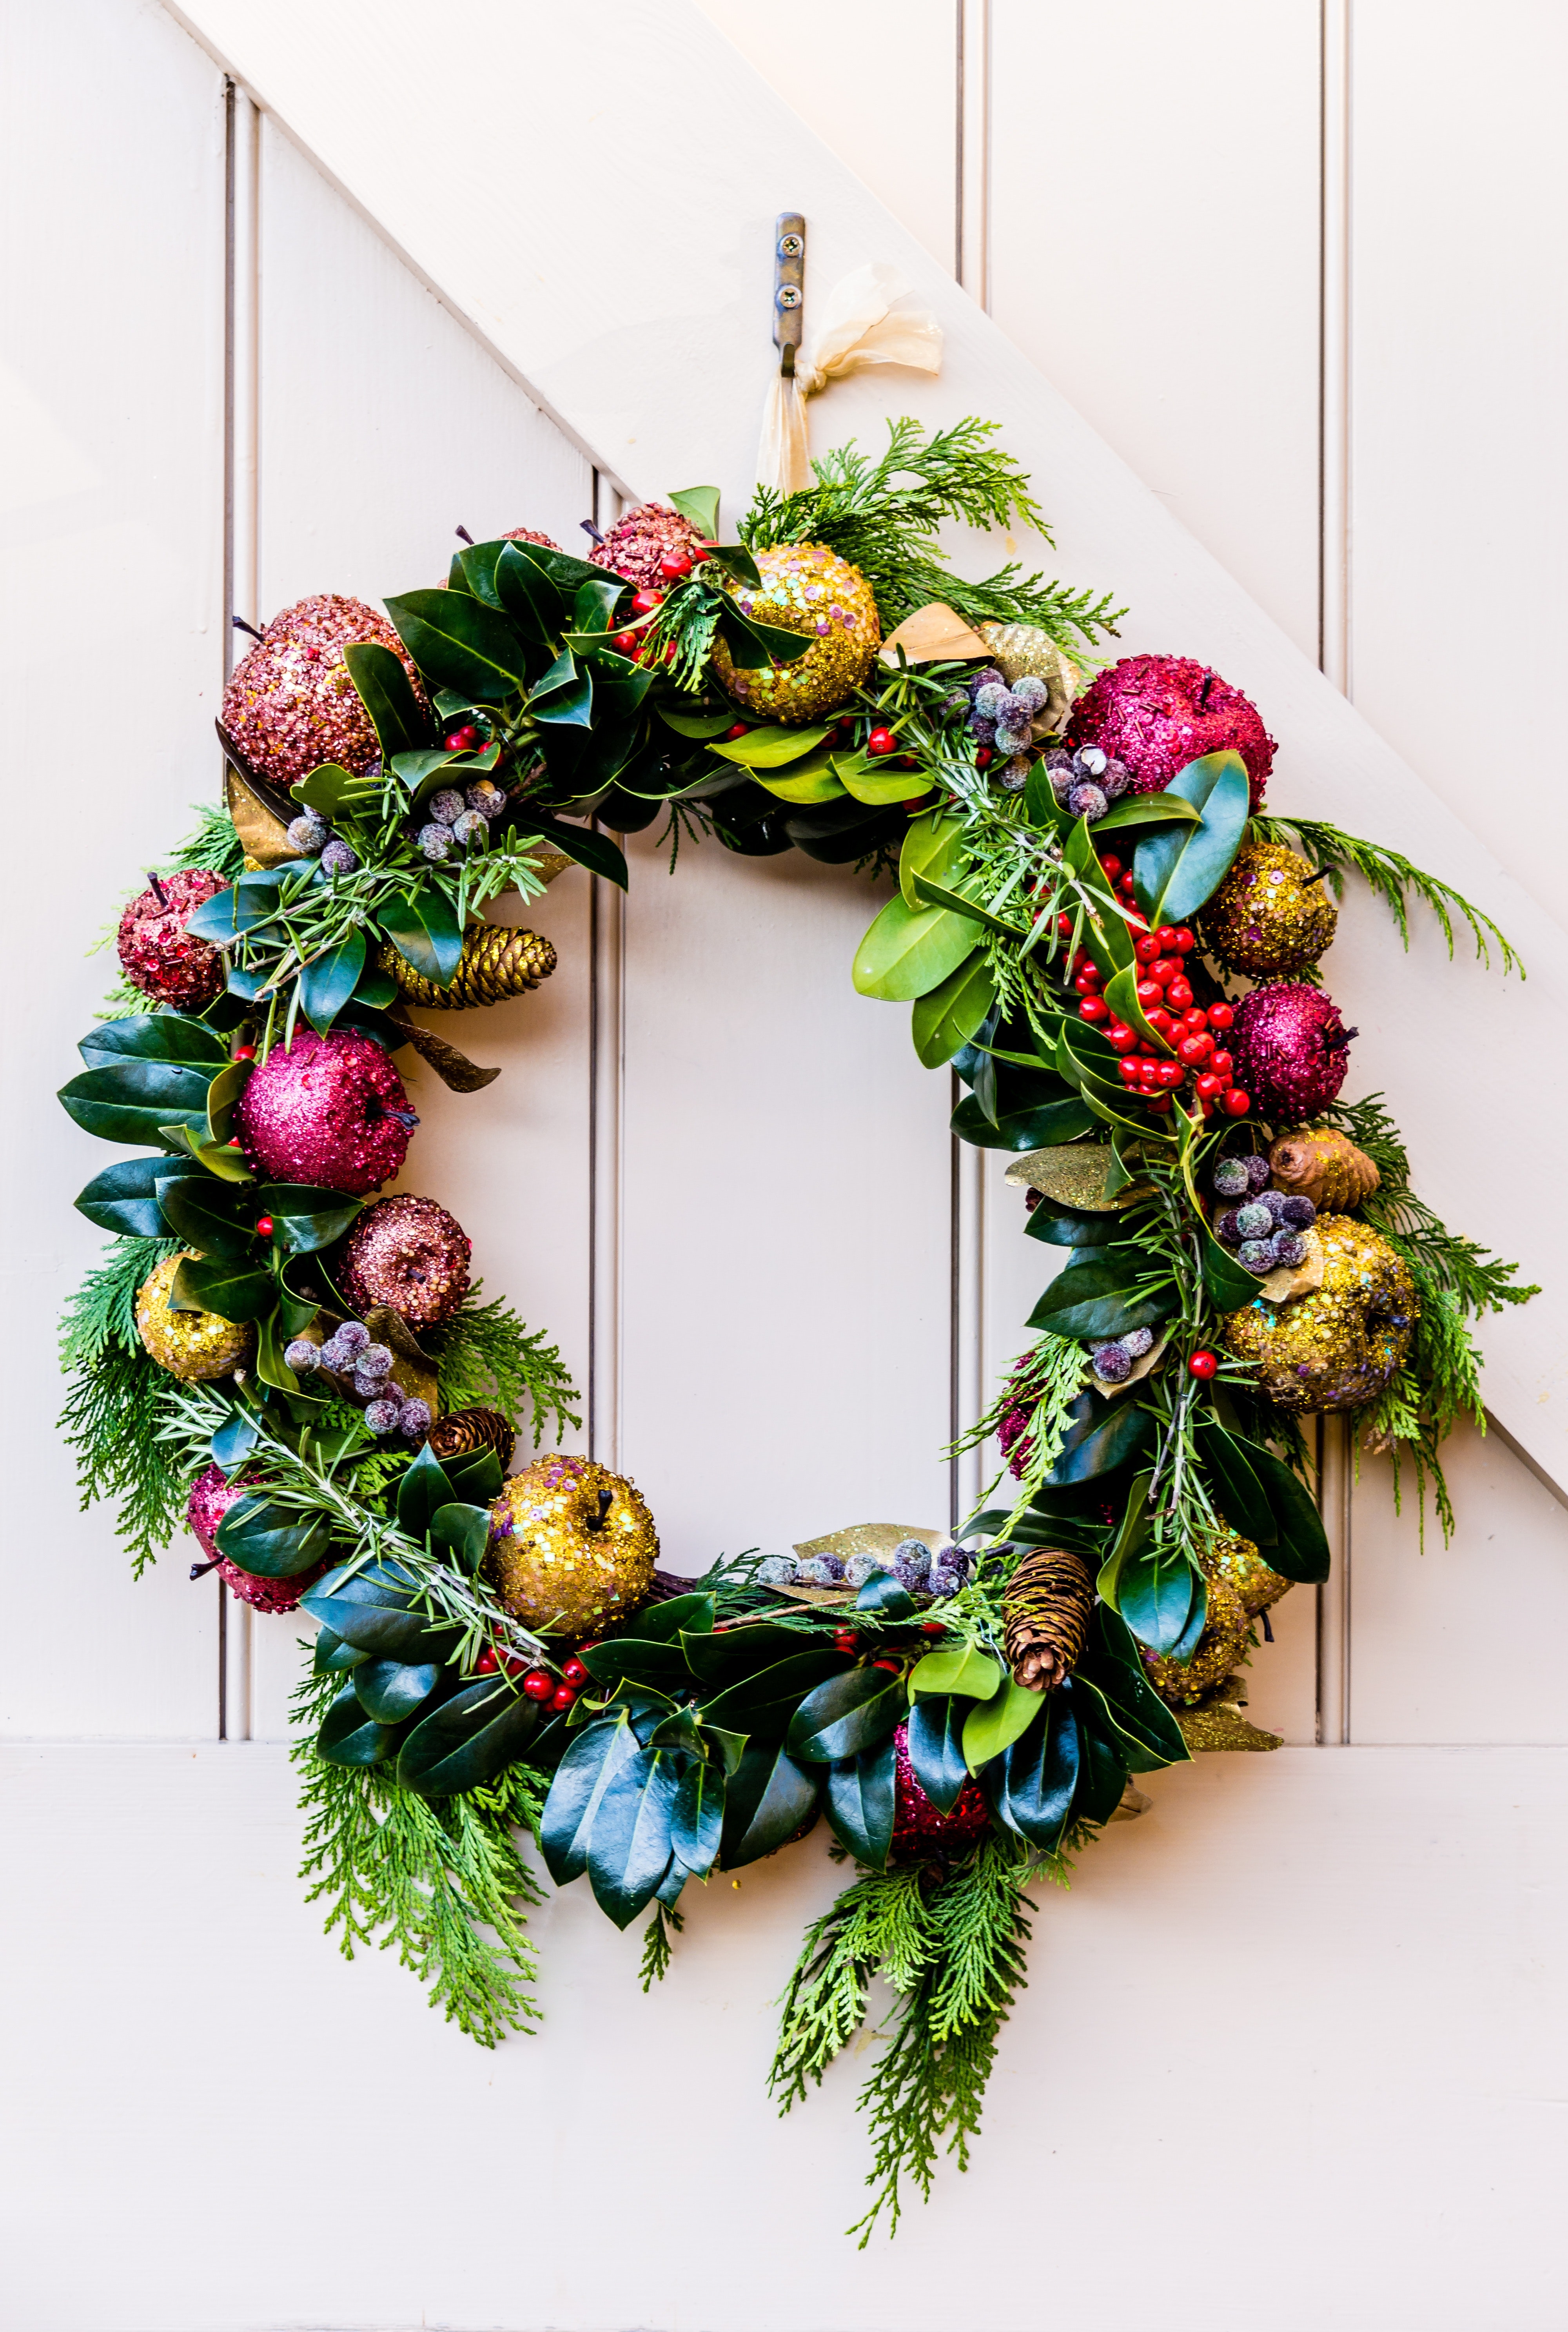 A green and red Christmas wreath